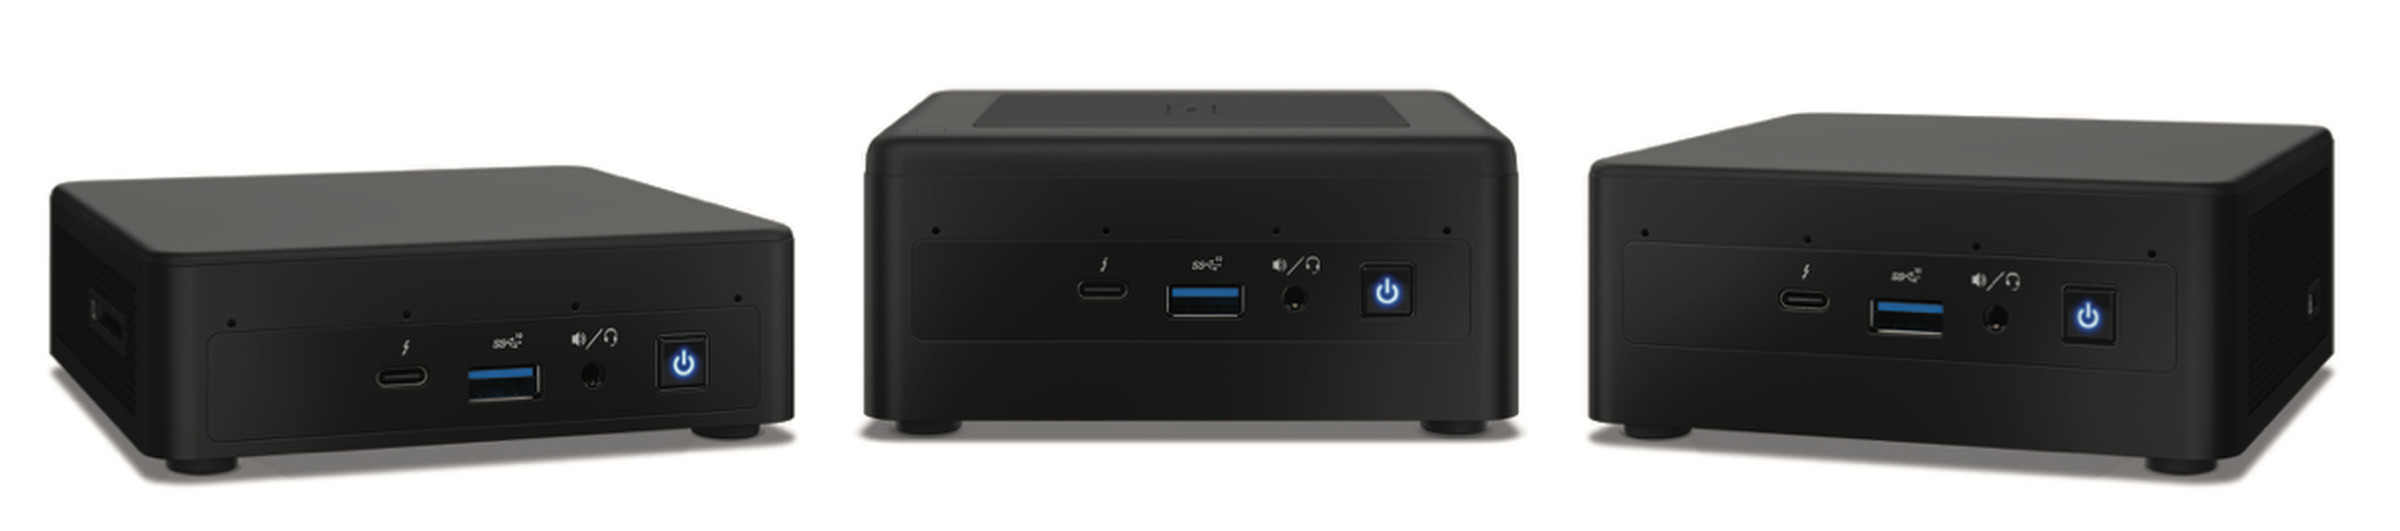 The NUC 11 Pro computers come in many sizes.